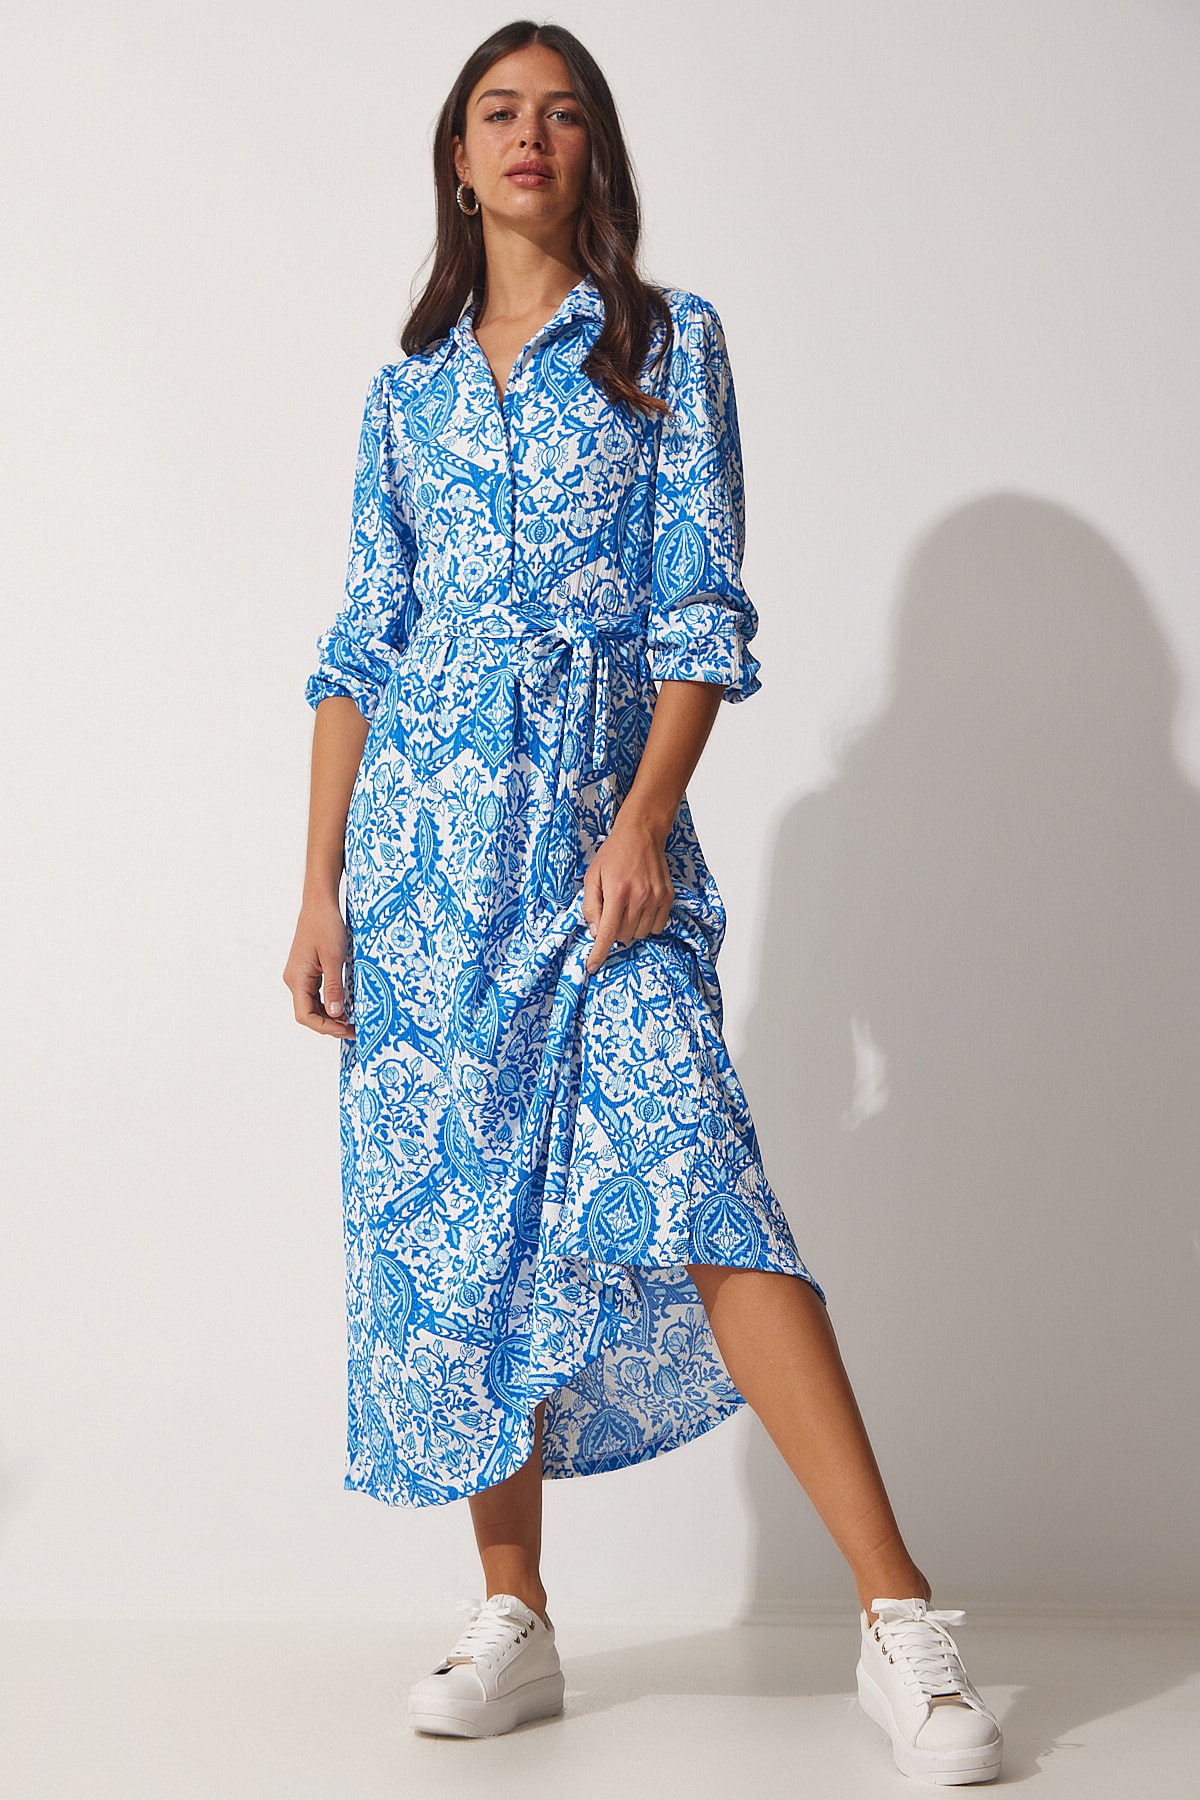 Happiness İstanbul Women's Blue Patterned Long Summer Knitted Shirt Dress